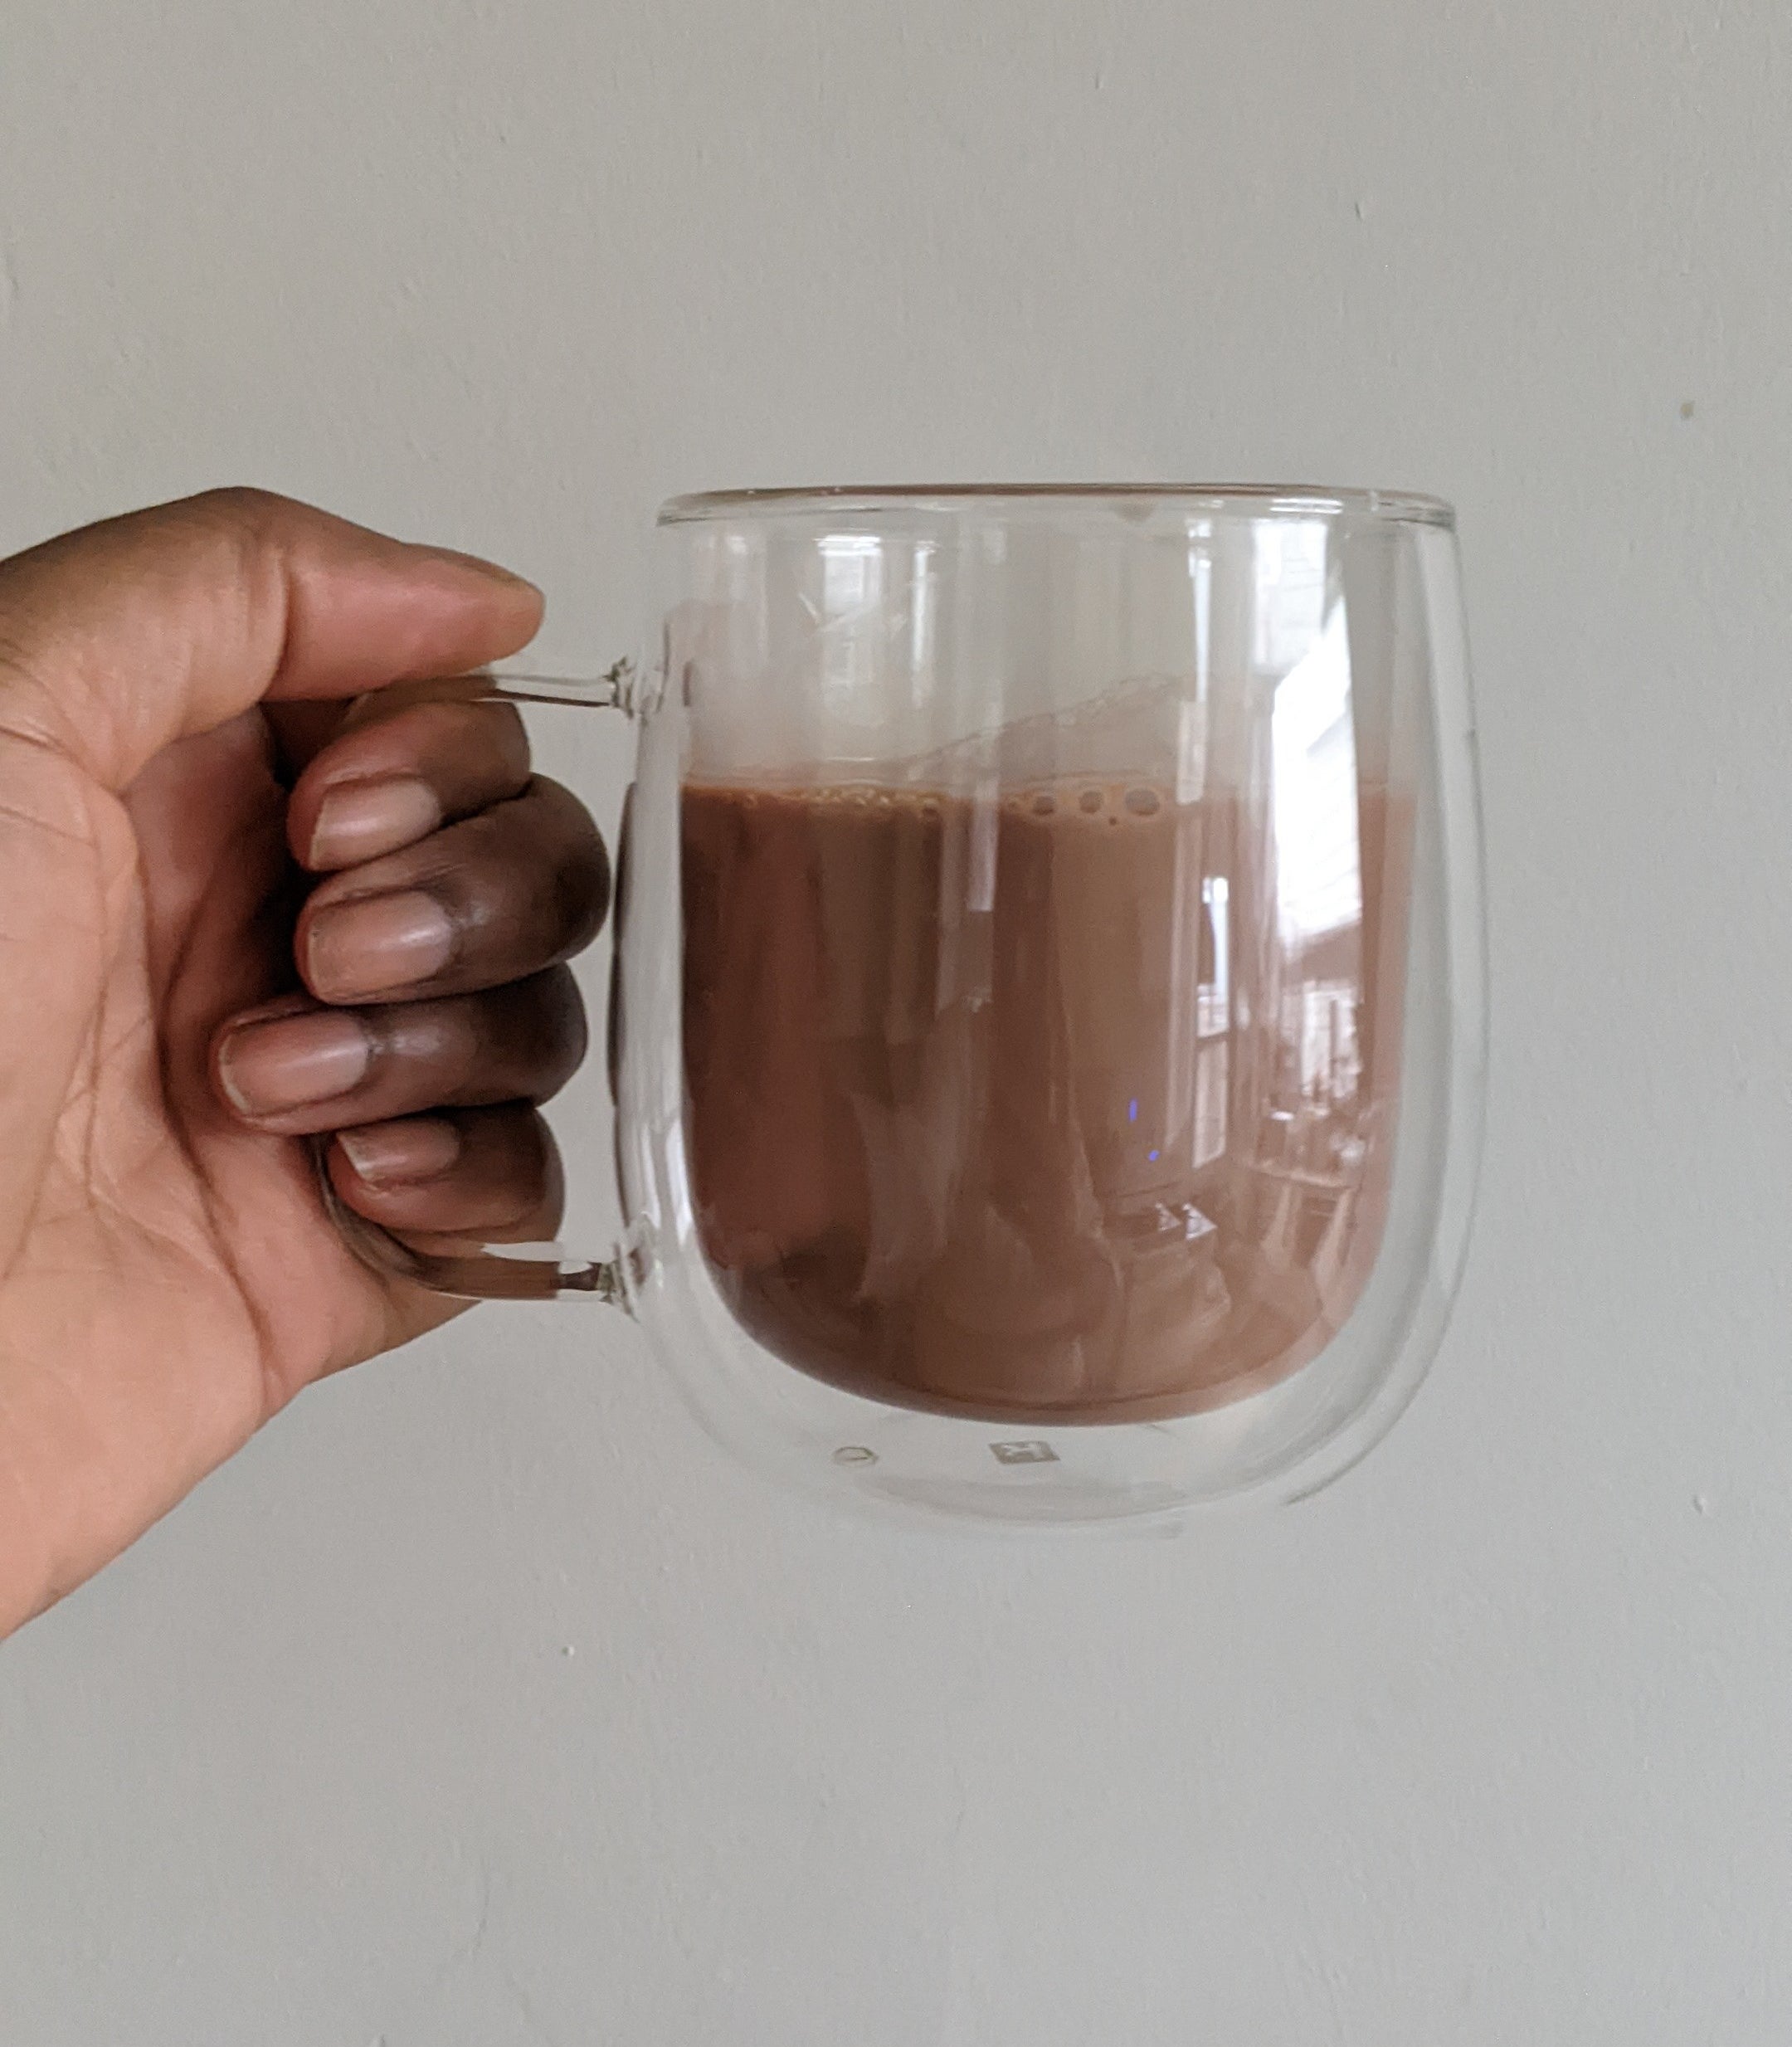 Kaysey holding a large glass mug filled with hot chocolate